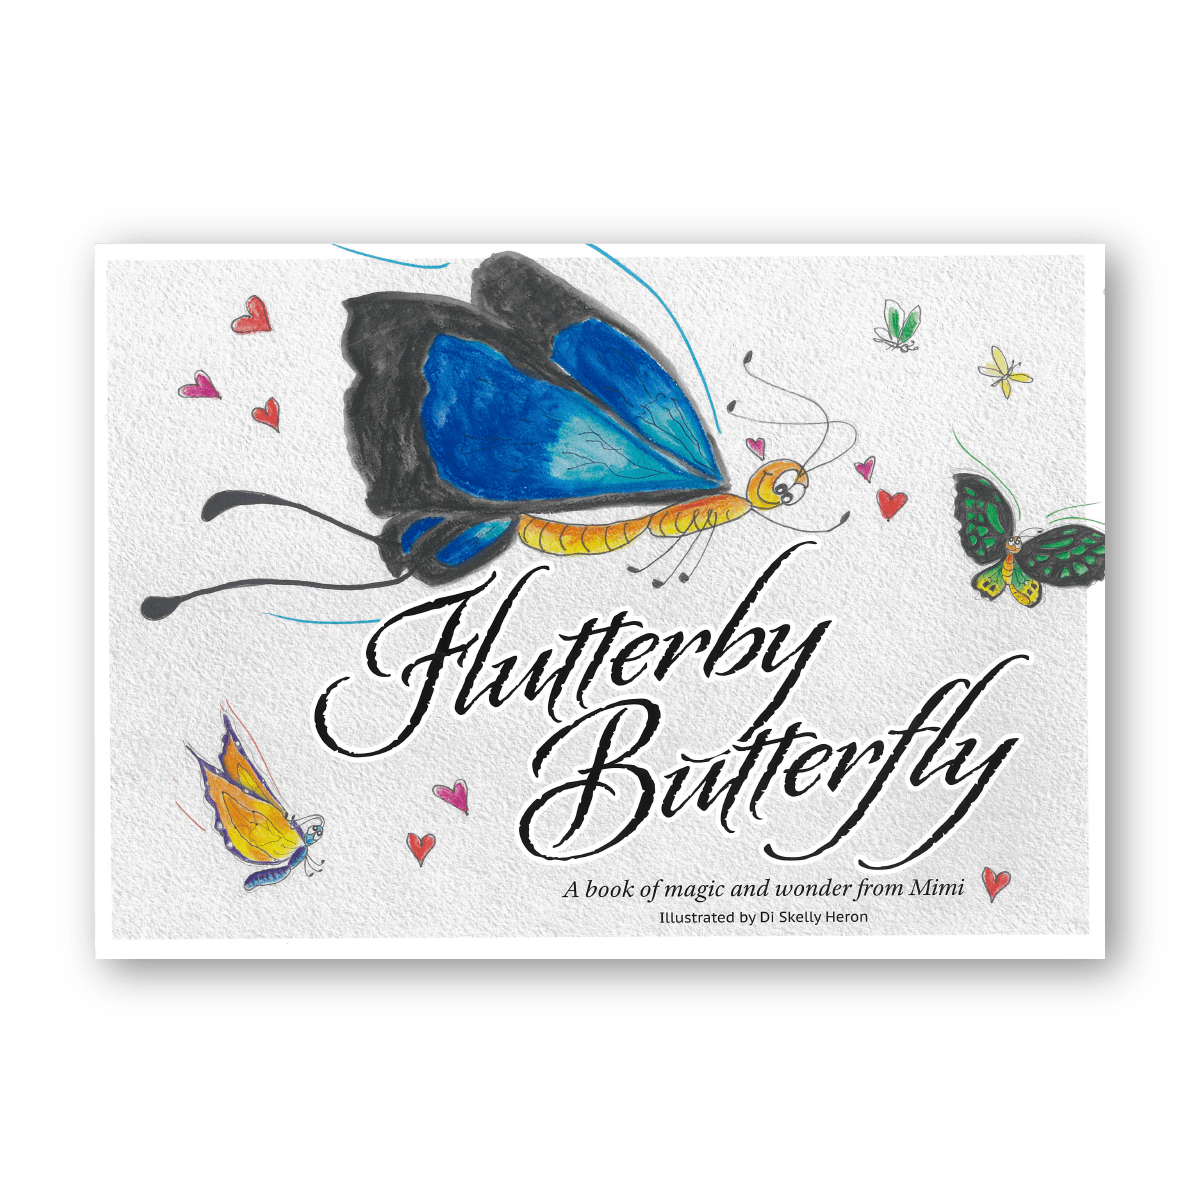 Flutterby Butterfly - A book of magic and wonder from Mimi